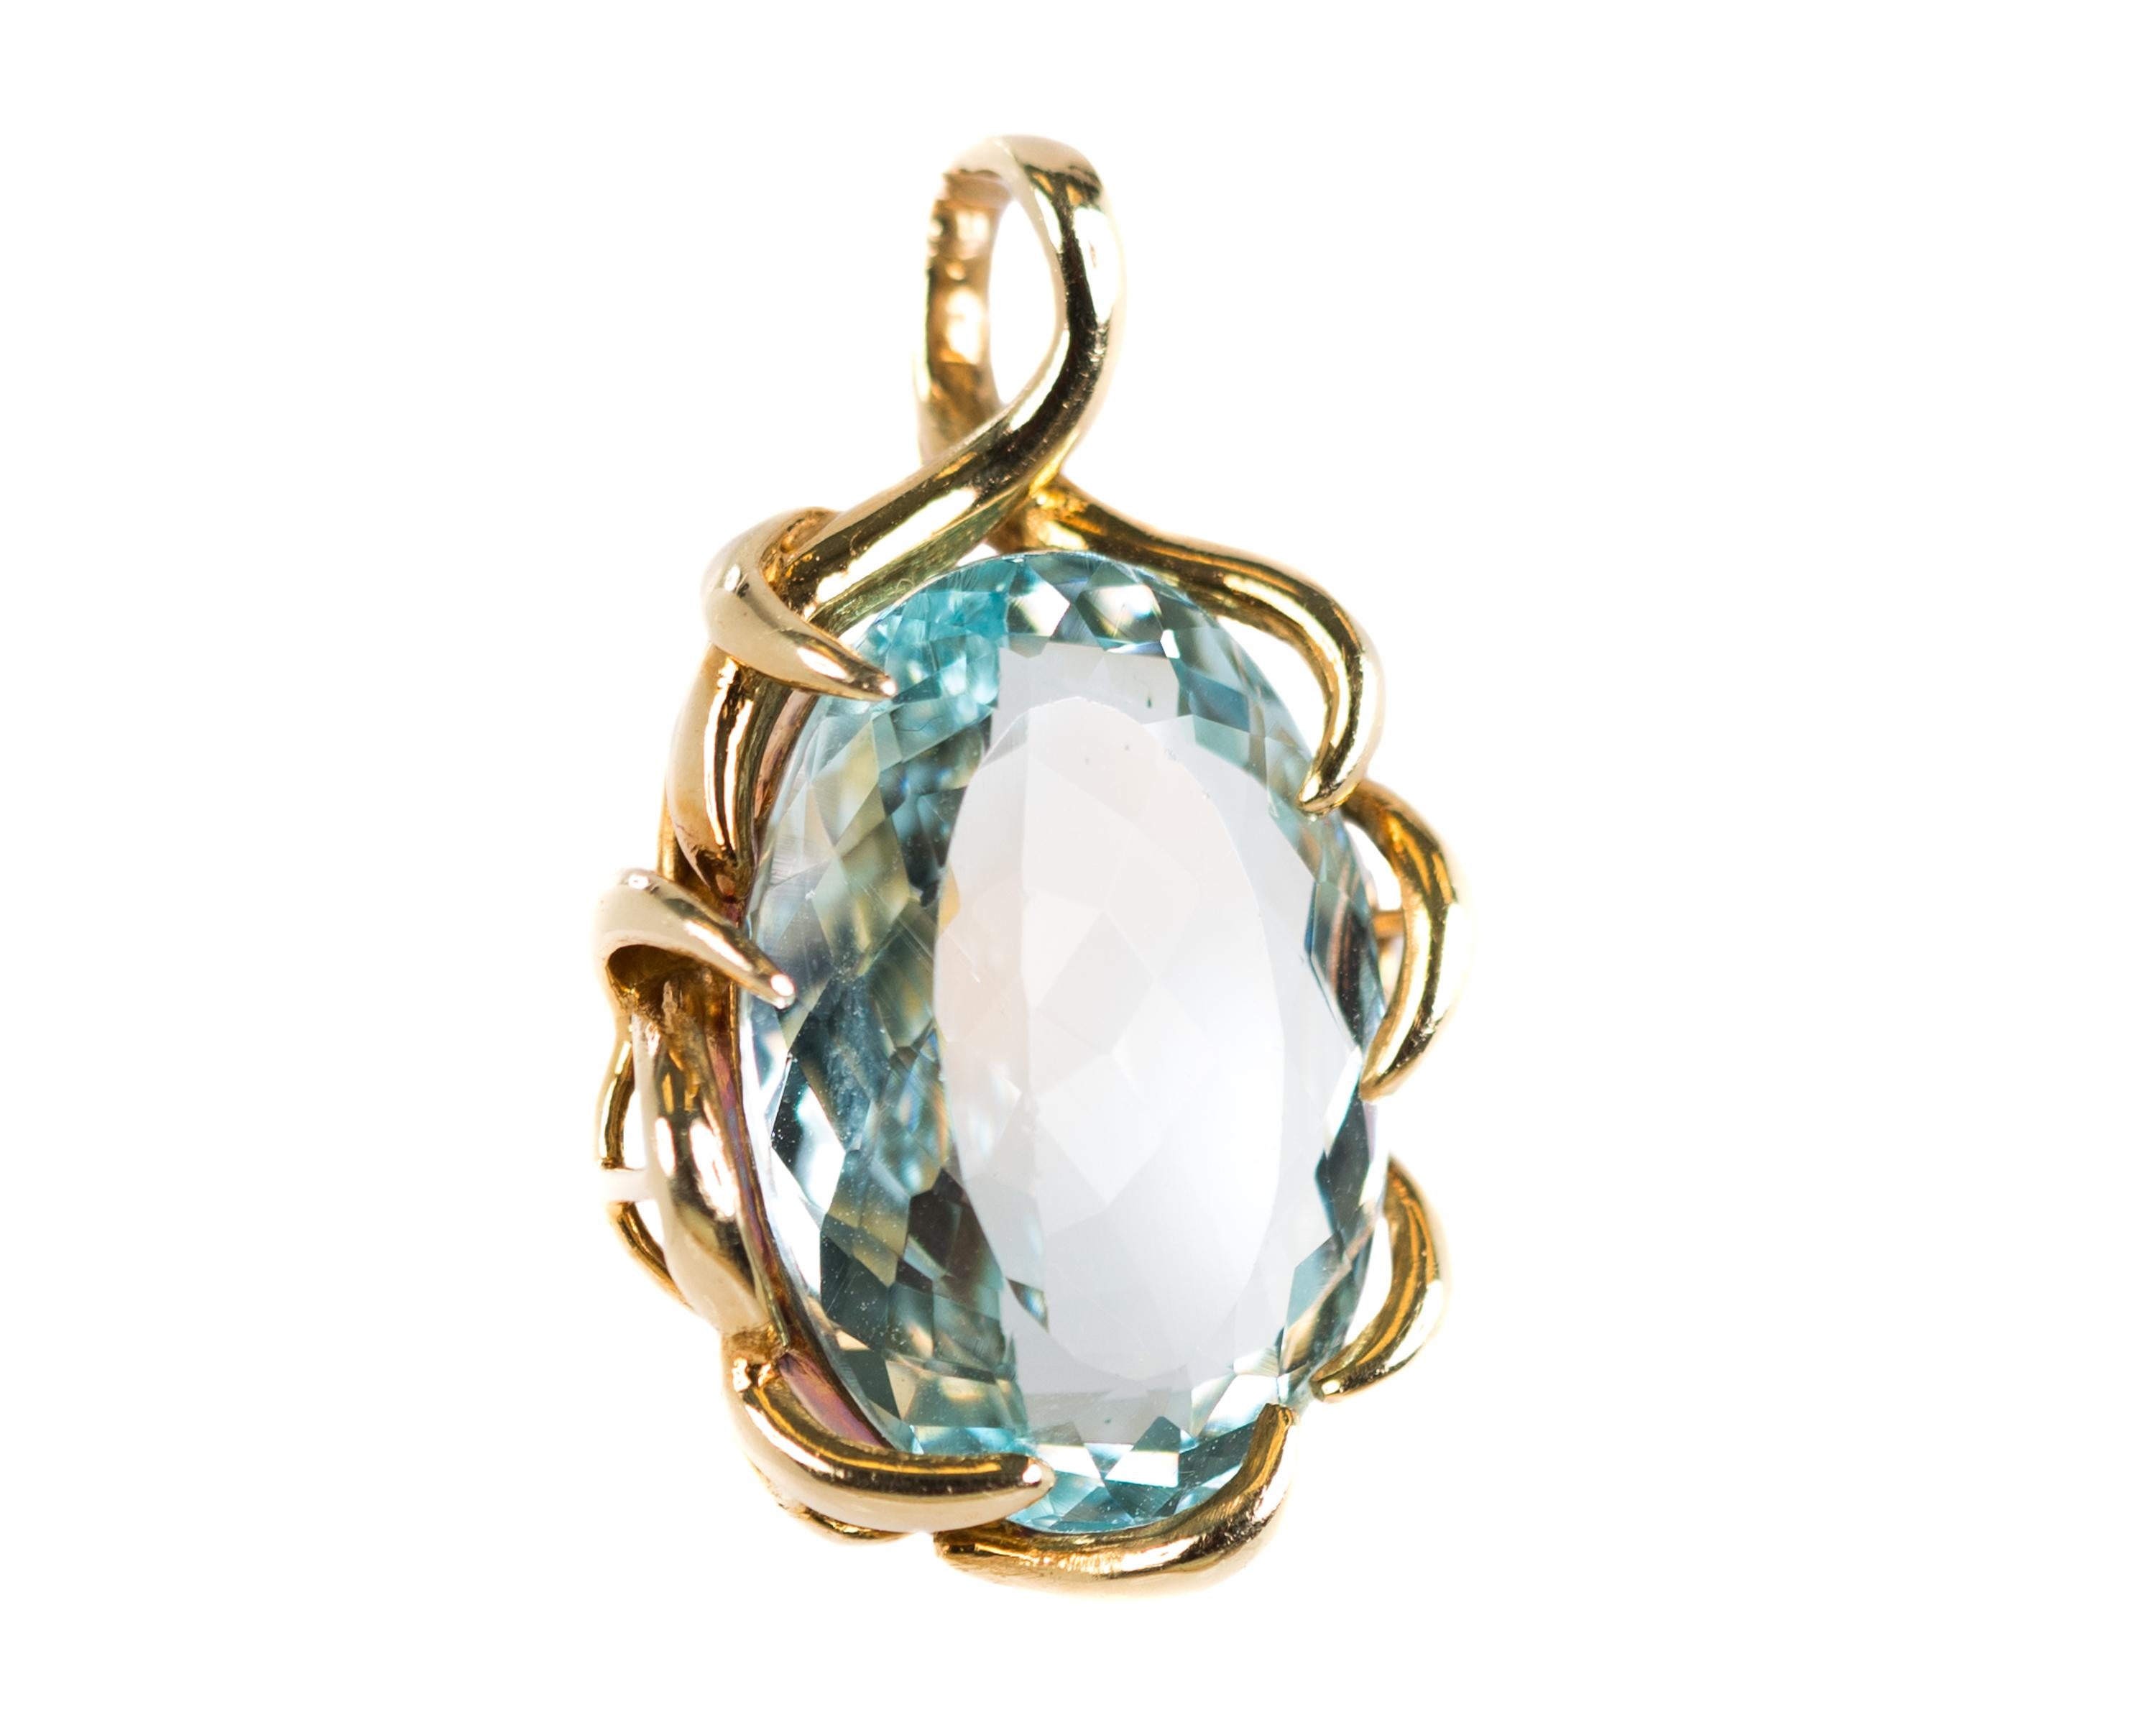 1950s Retro Oval cut Aquamarine Pendant - 14 Karat Yellow Gold, Aquamarine

Features:
8.0 carat Aquamarine oval cut Center Stone
14 Karat Yellow Gold, Ornate 7-Prong Setting
Open Gallery and Back
Elevated Setting
Dimensions: 30 x 18 millimeters